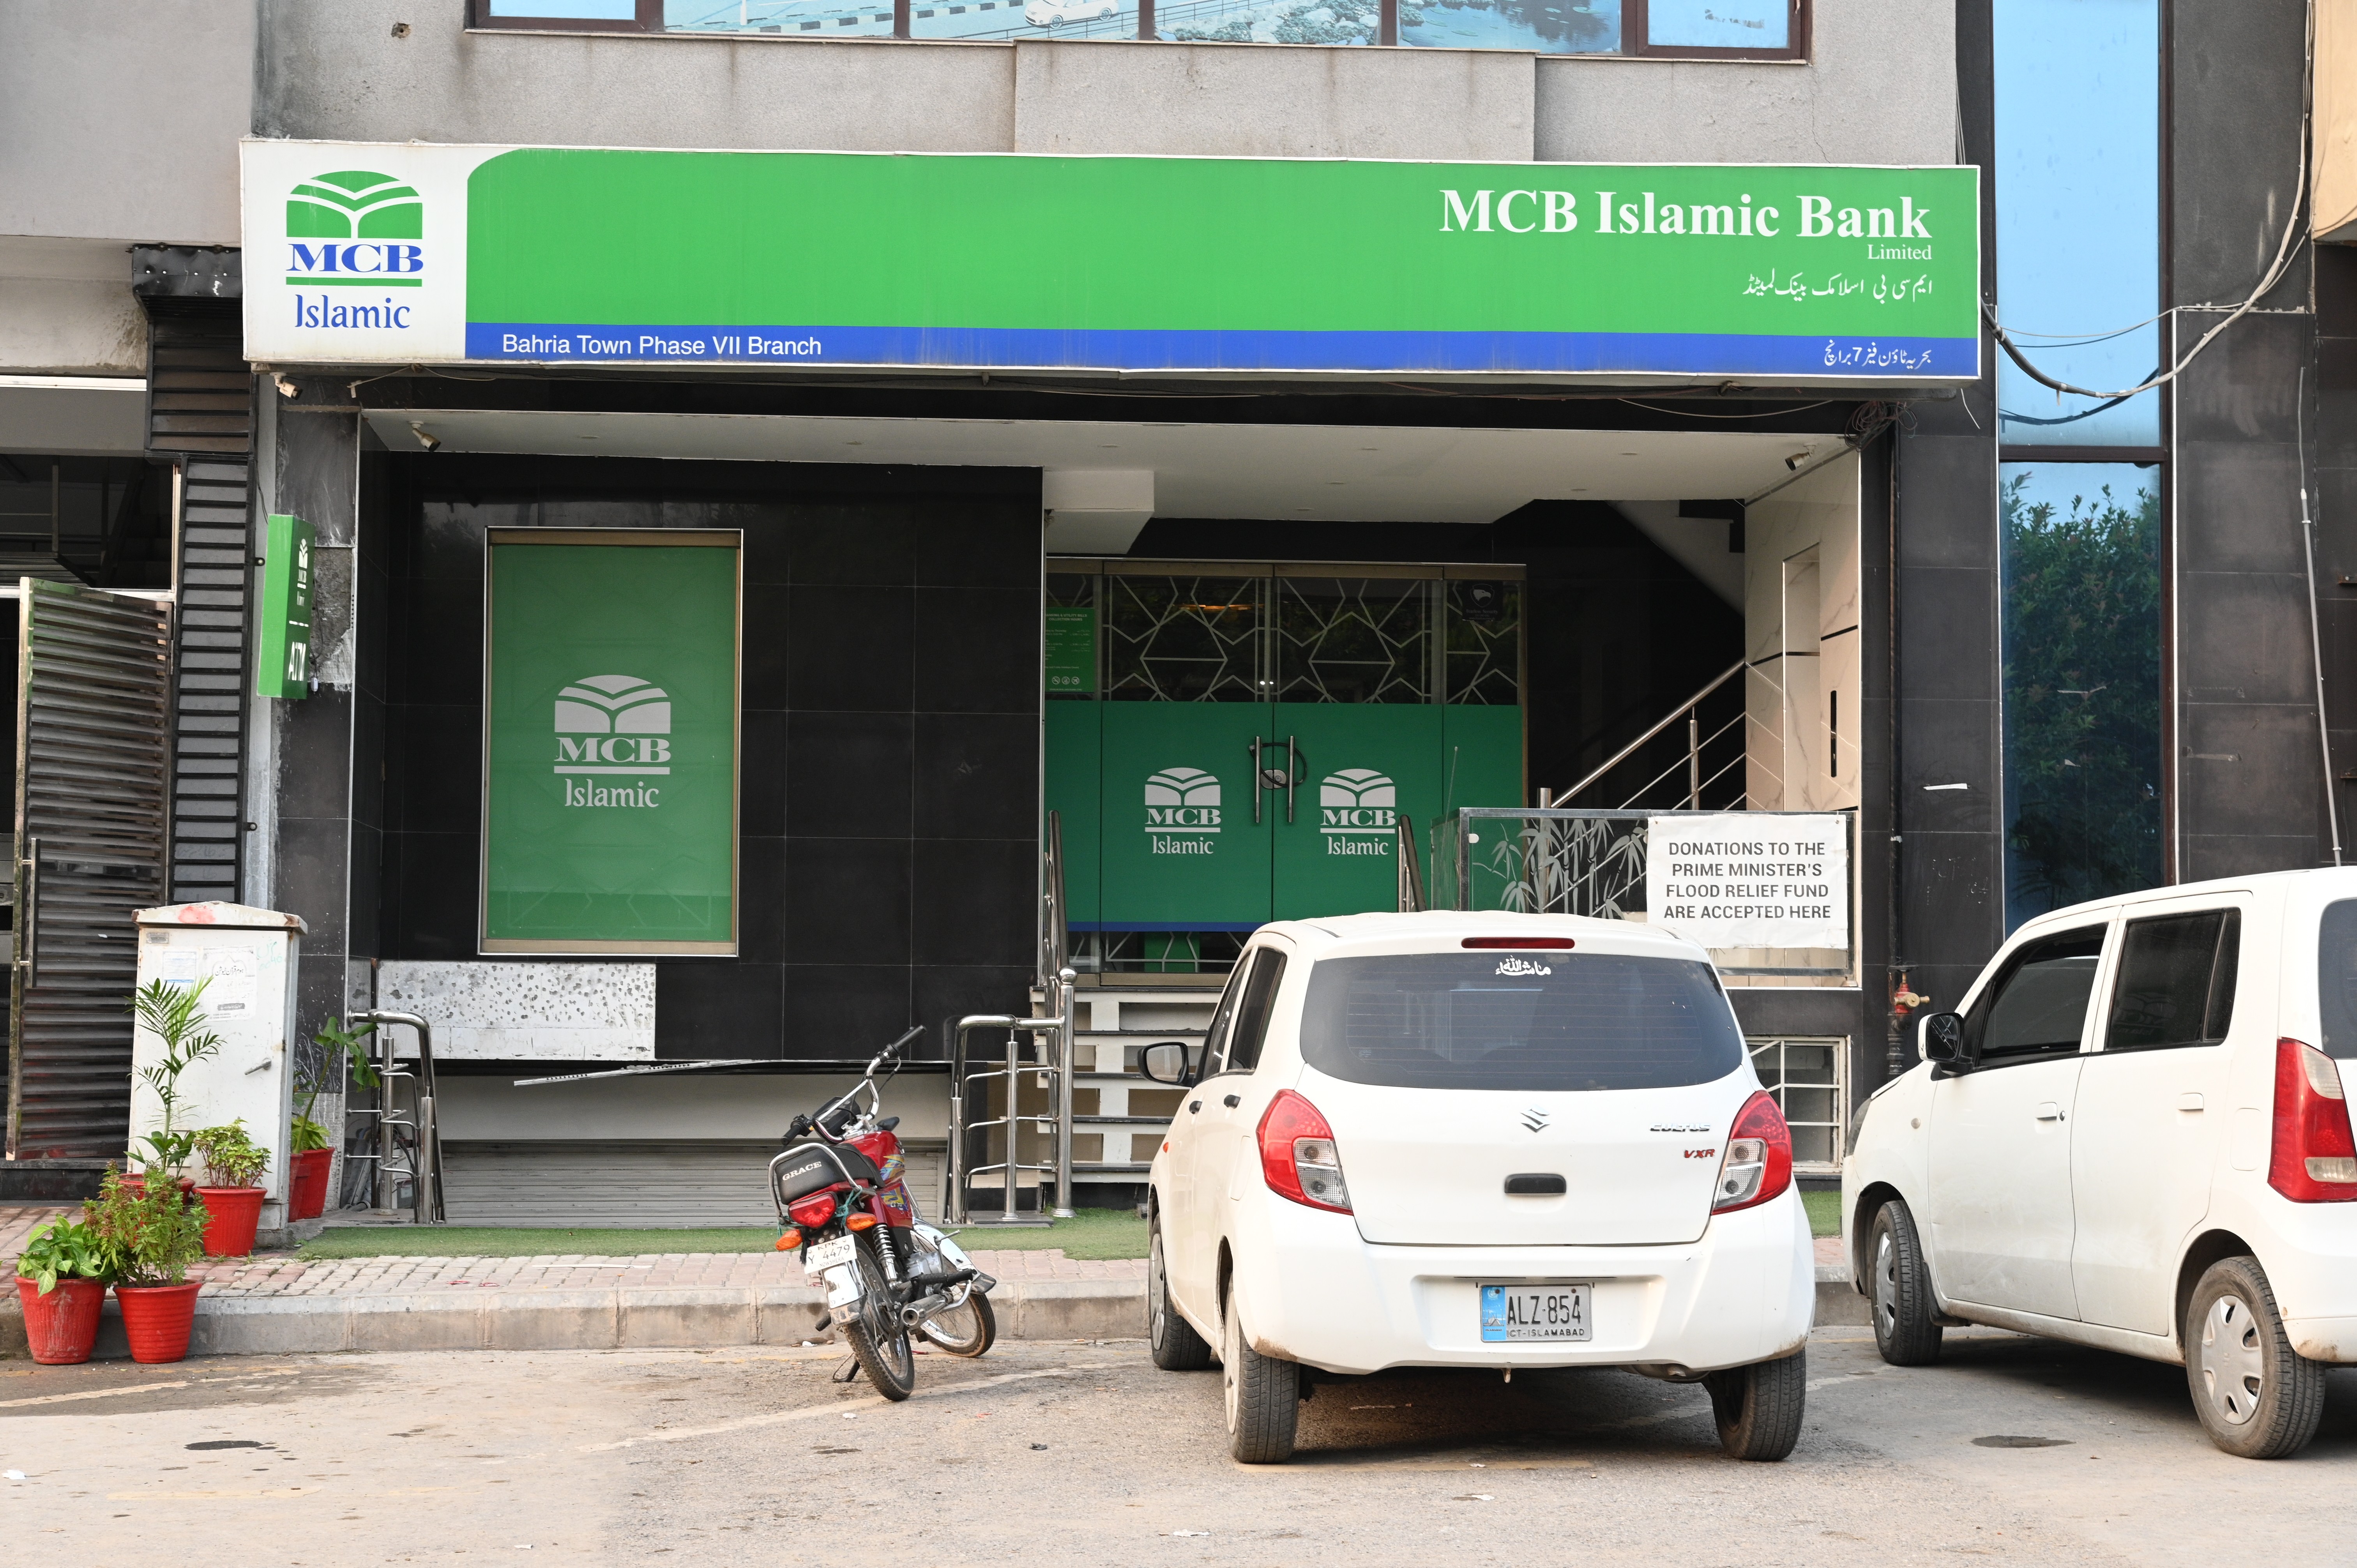 MCB Islamic Bank Limited, Bahria Town Phase VII Branch